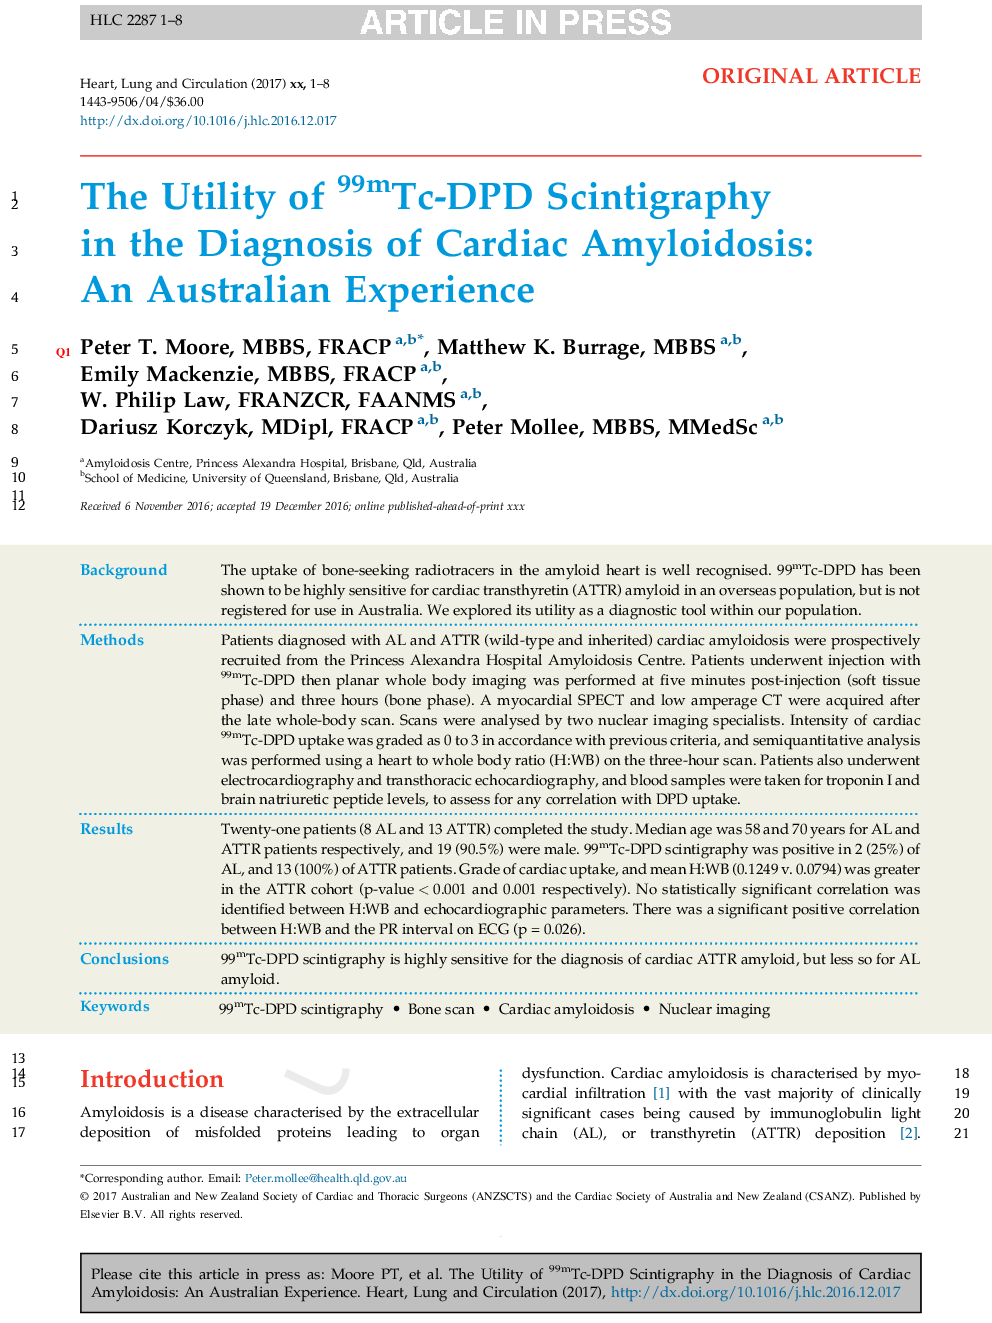 The Utility of 99mTc-DPD Scintigraphy in the Diagnosis of Cardiac Amyloidosis: An Australian Experience